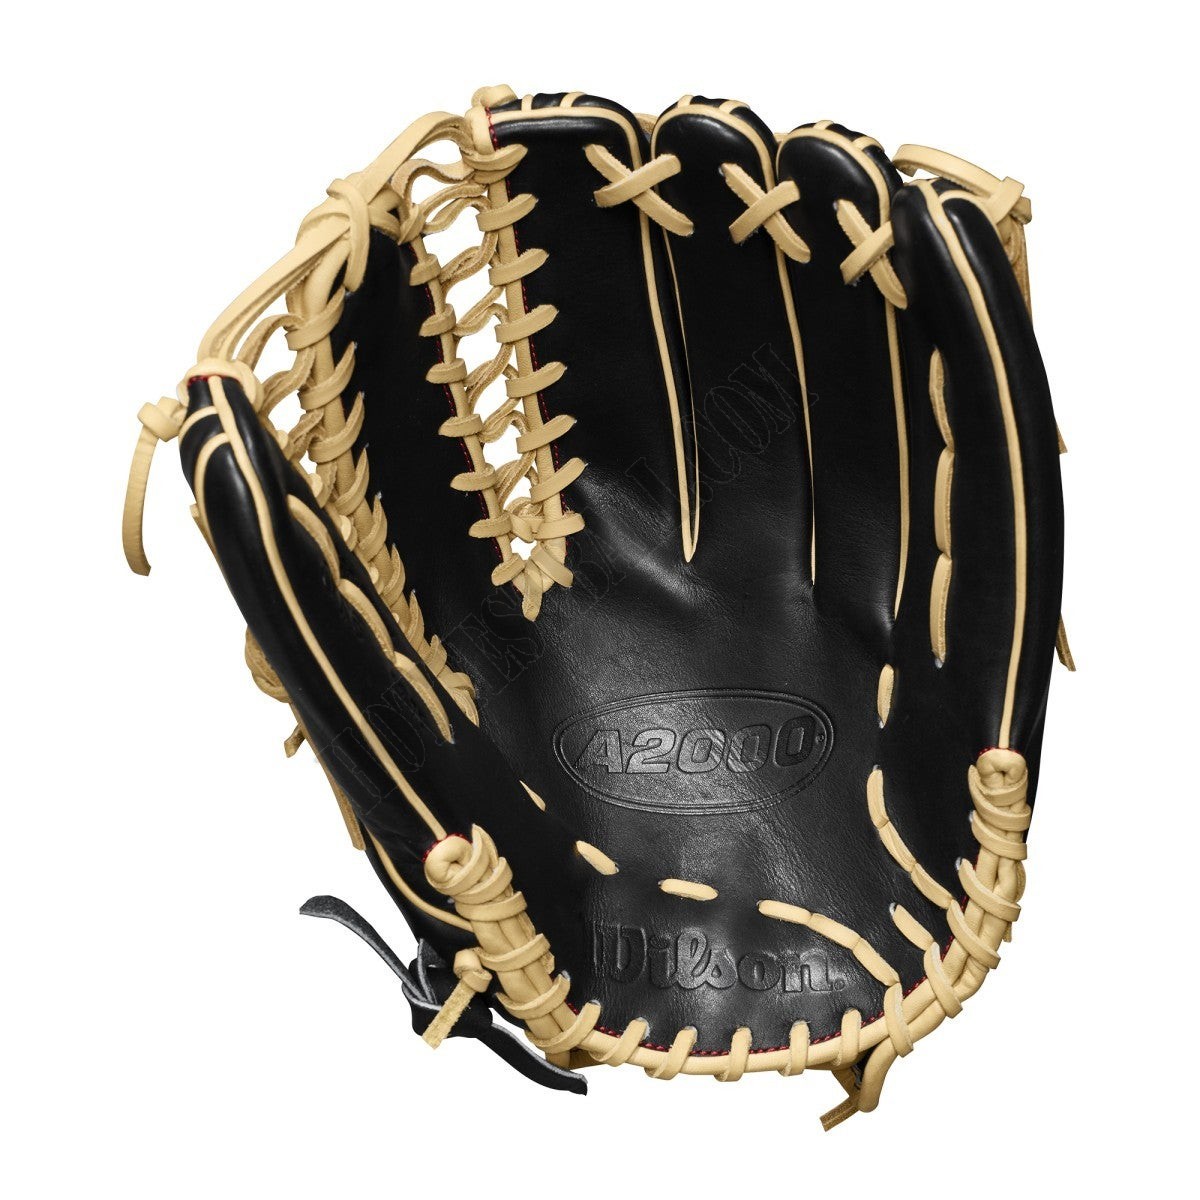 2020 A2000 OT6 12.75" Outfield Baseball Glove ● Wilson Promotions - -2